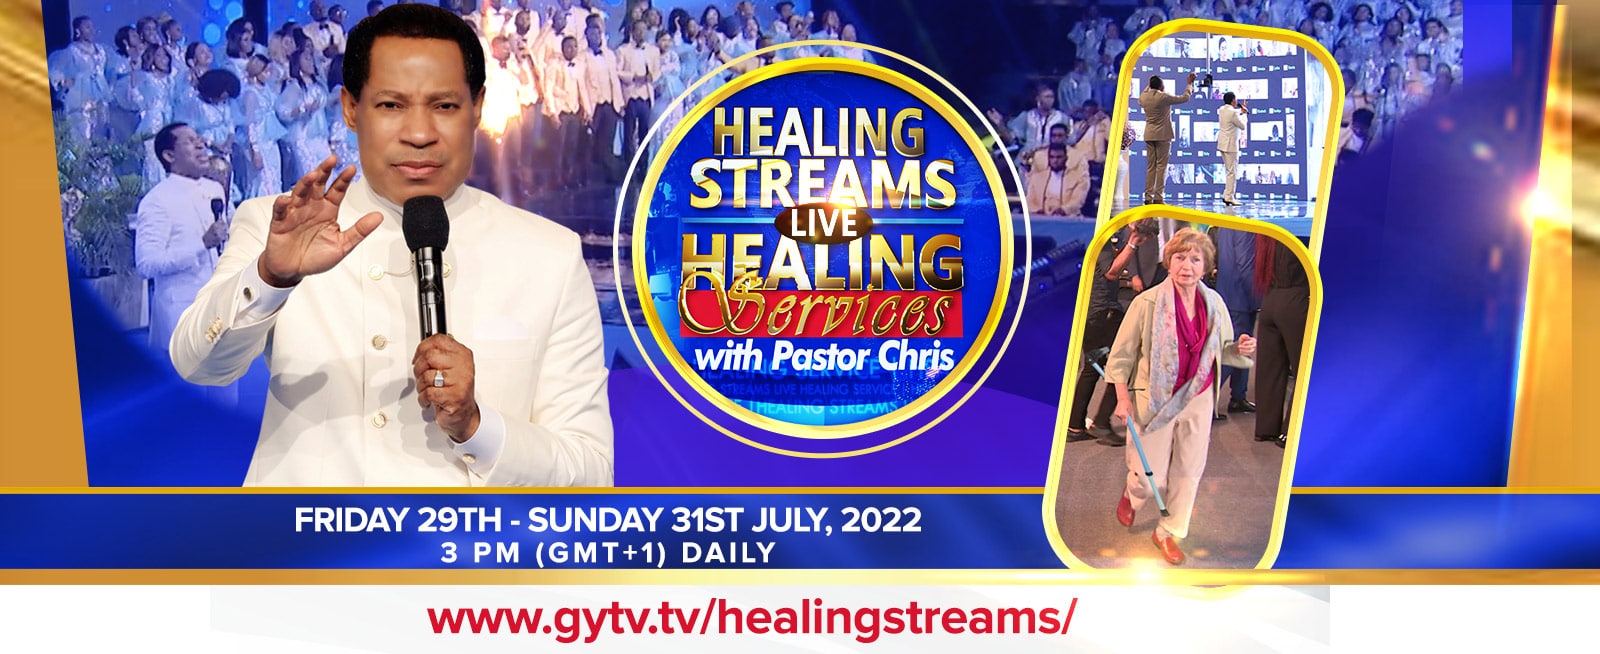 Register for the Healing Streams Live Healing Services with Pastor Chris